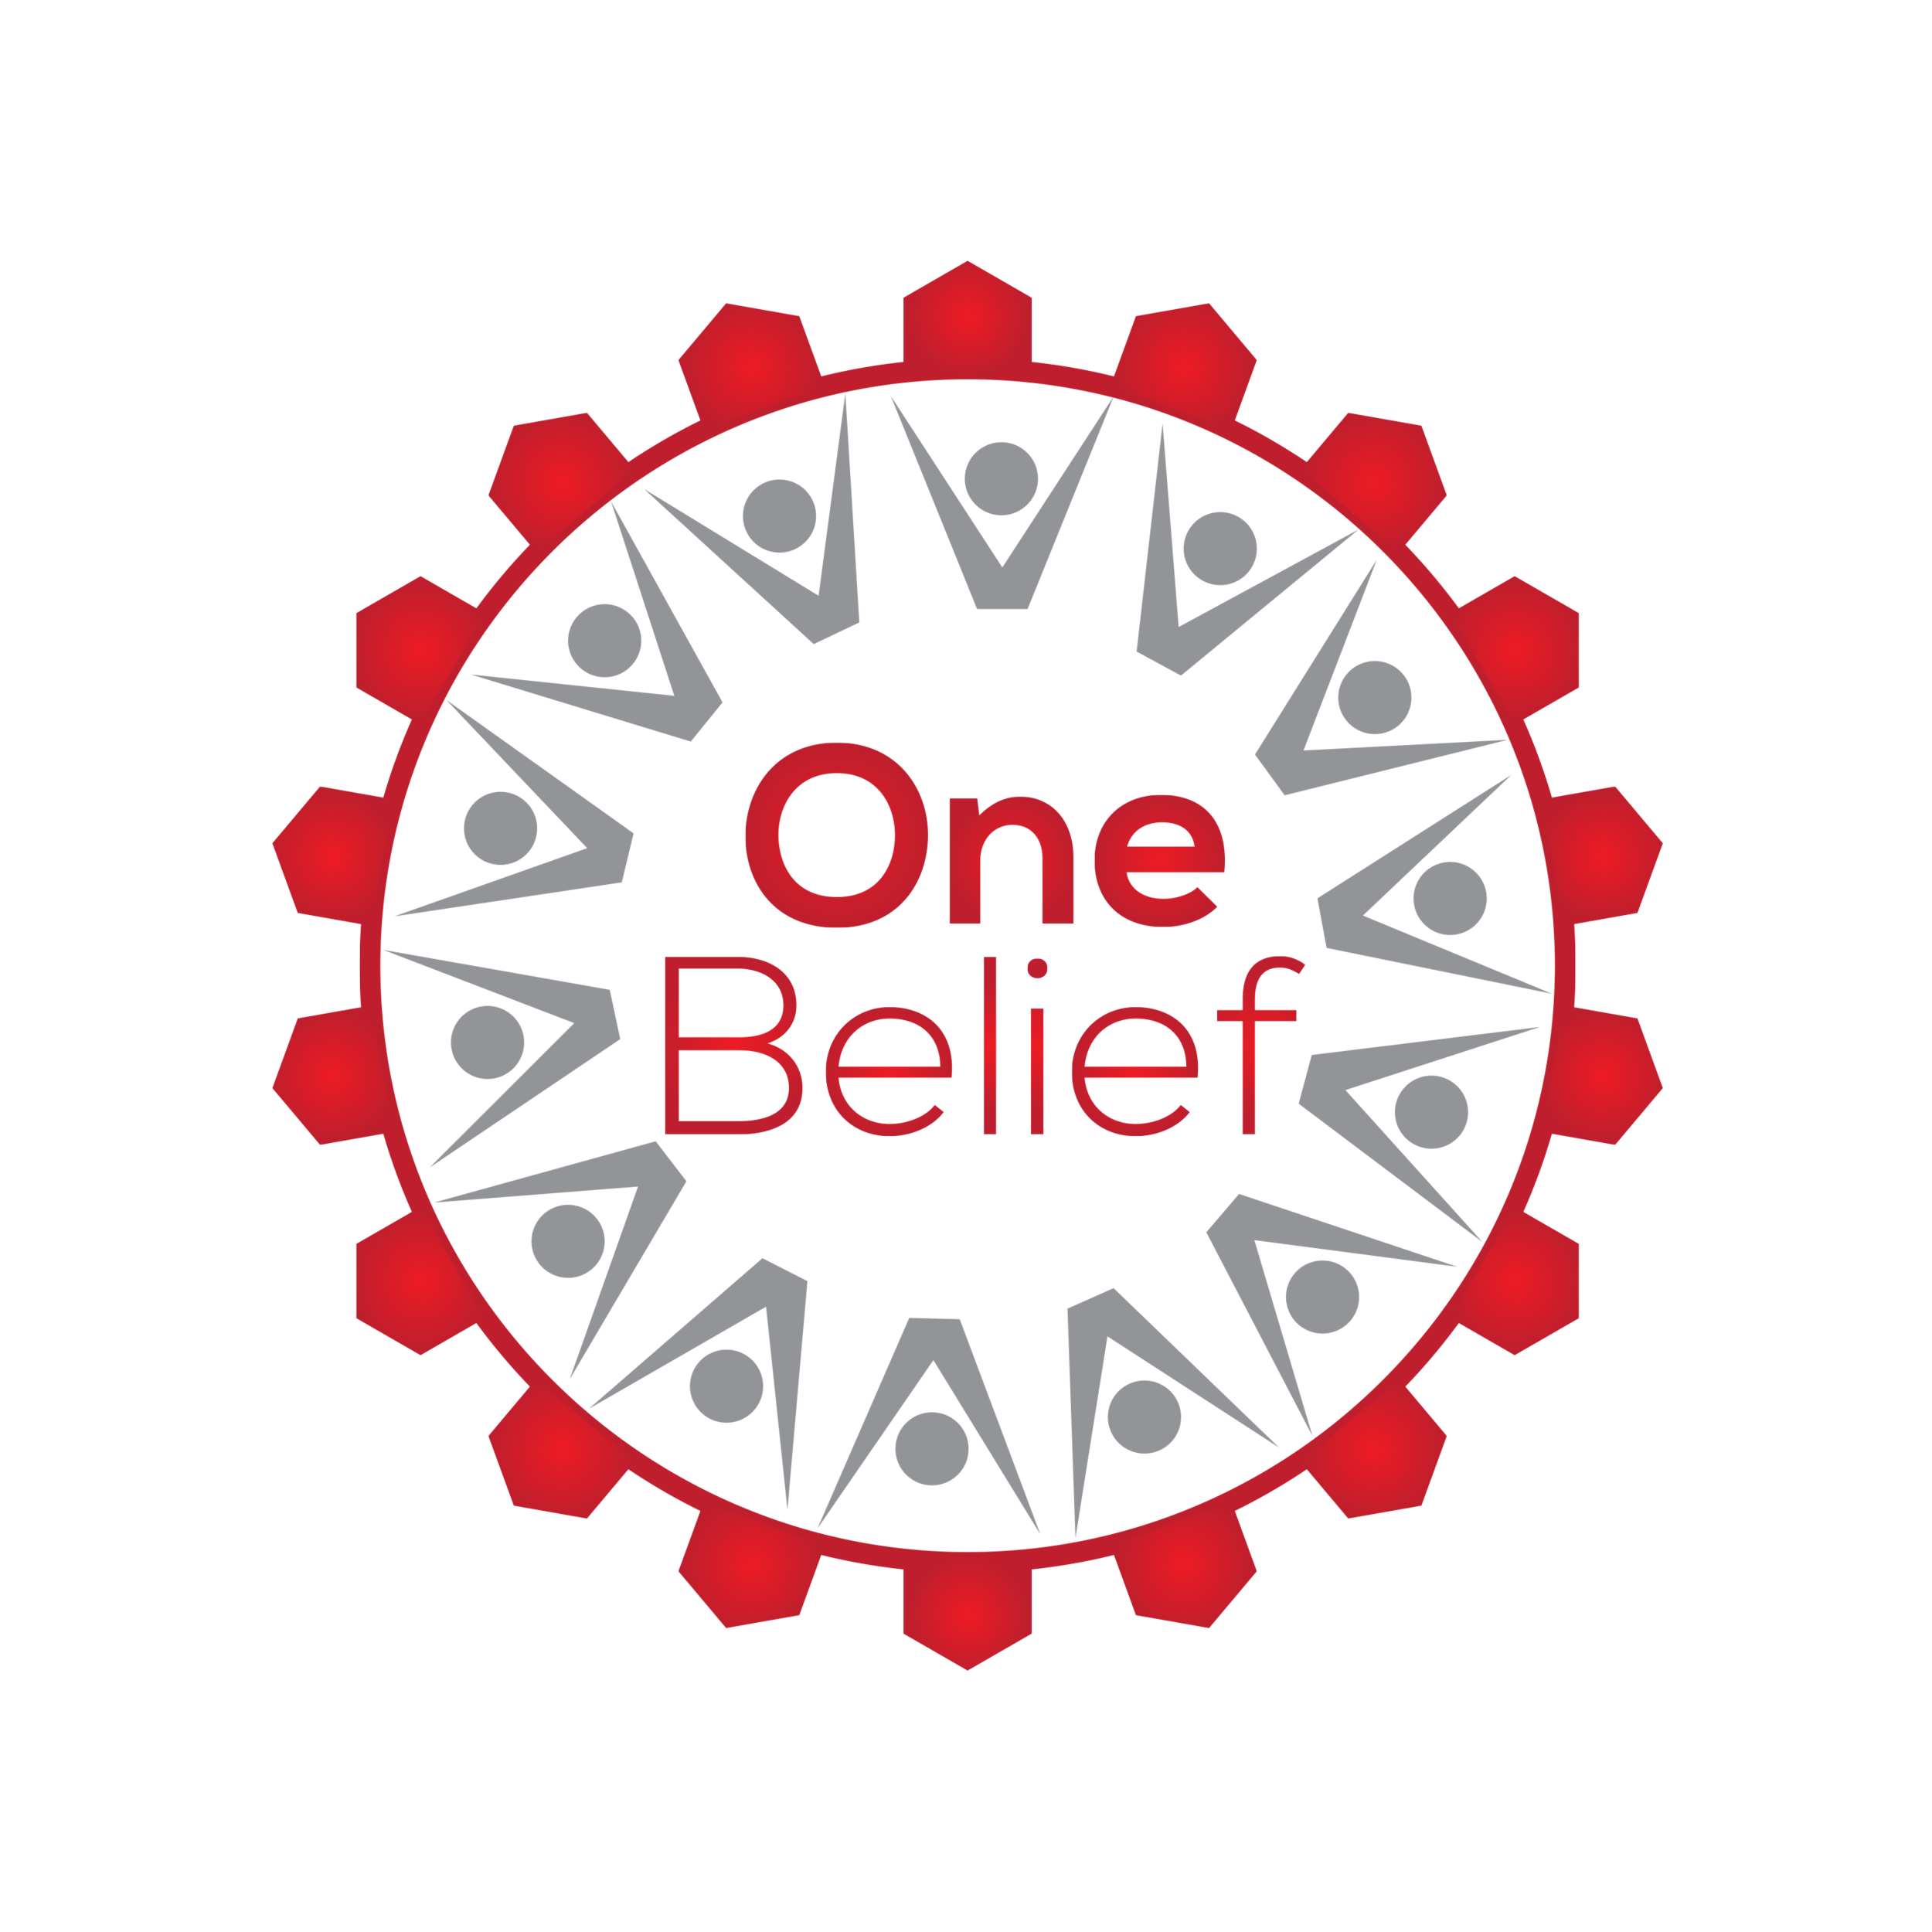 Email 216425_one_belief_logo_HV_02 (6).png